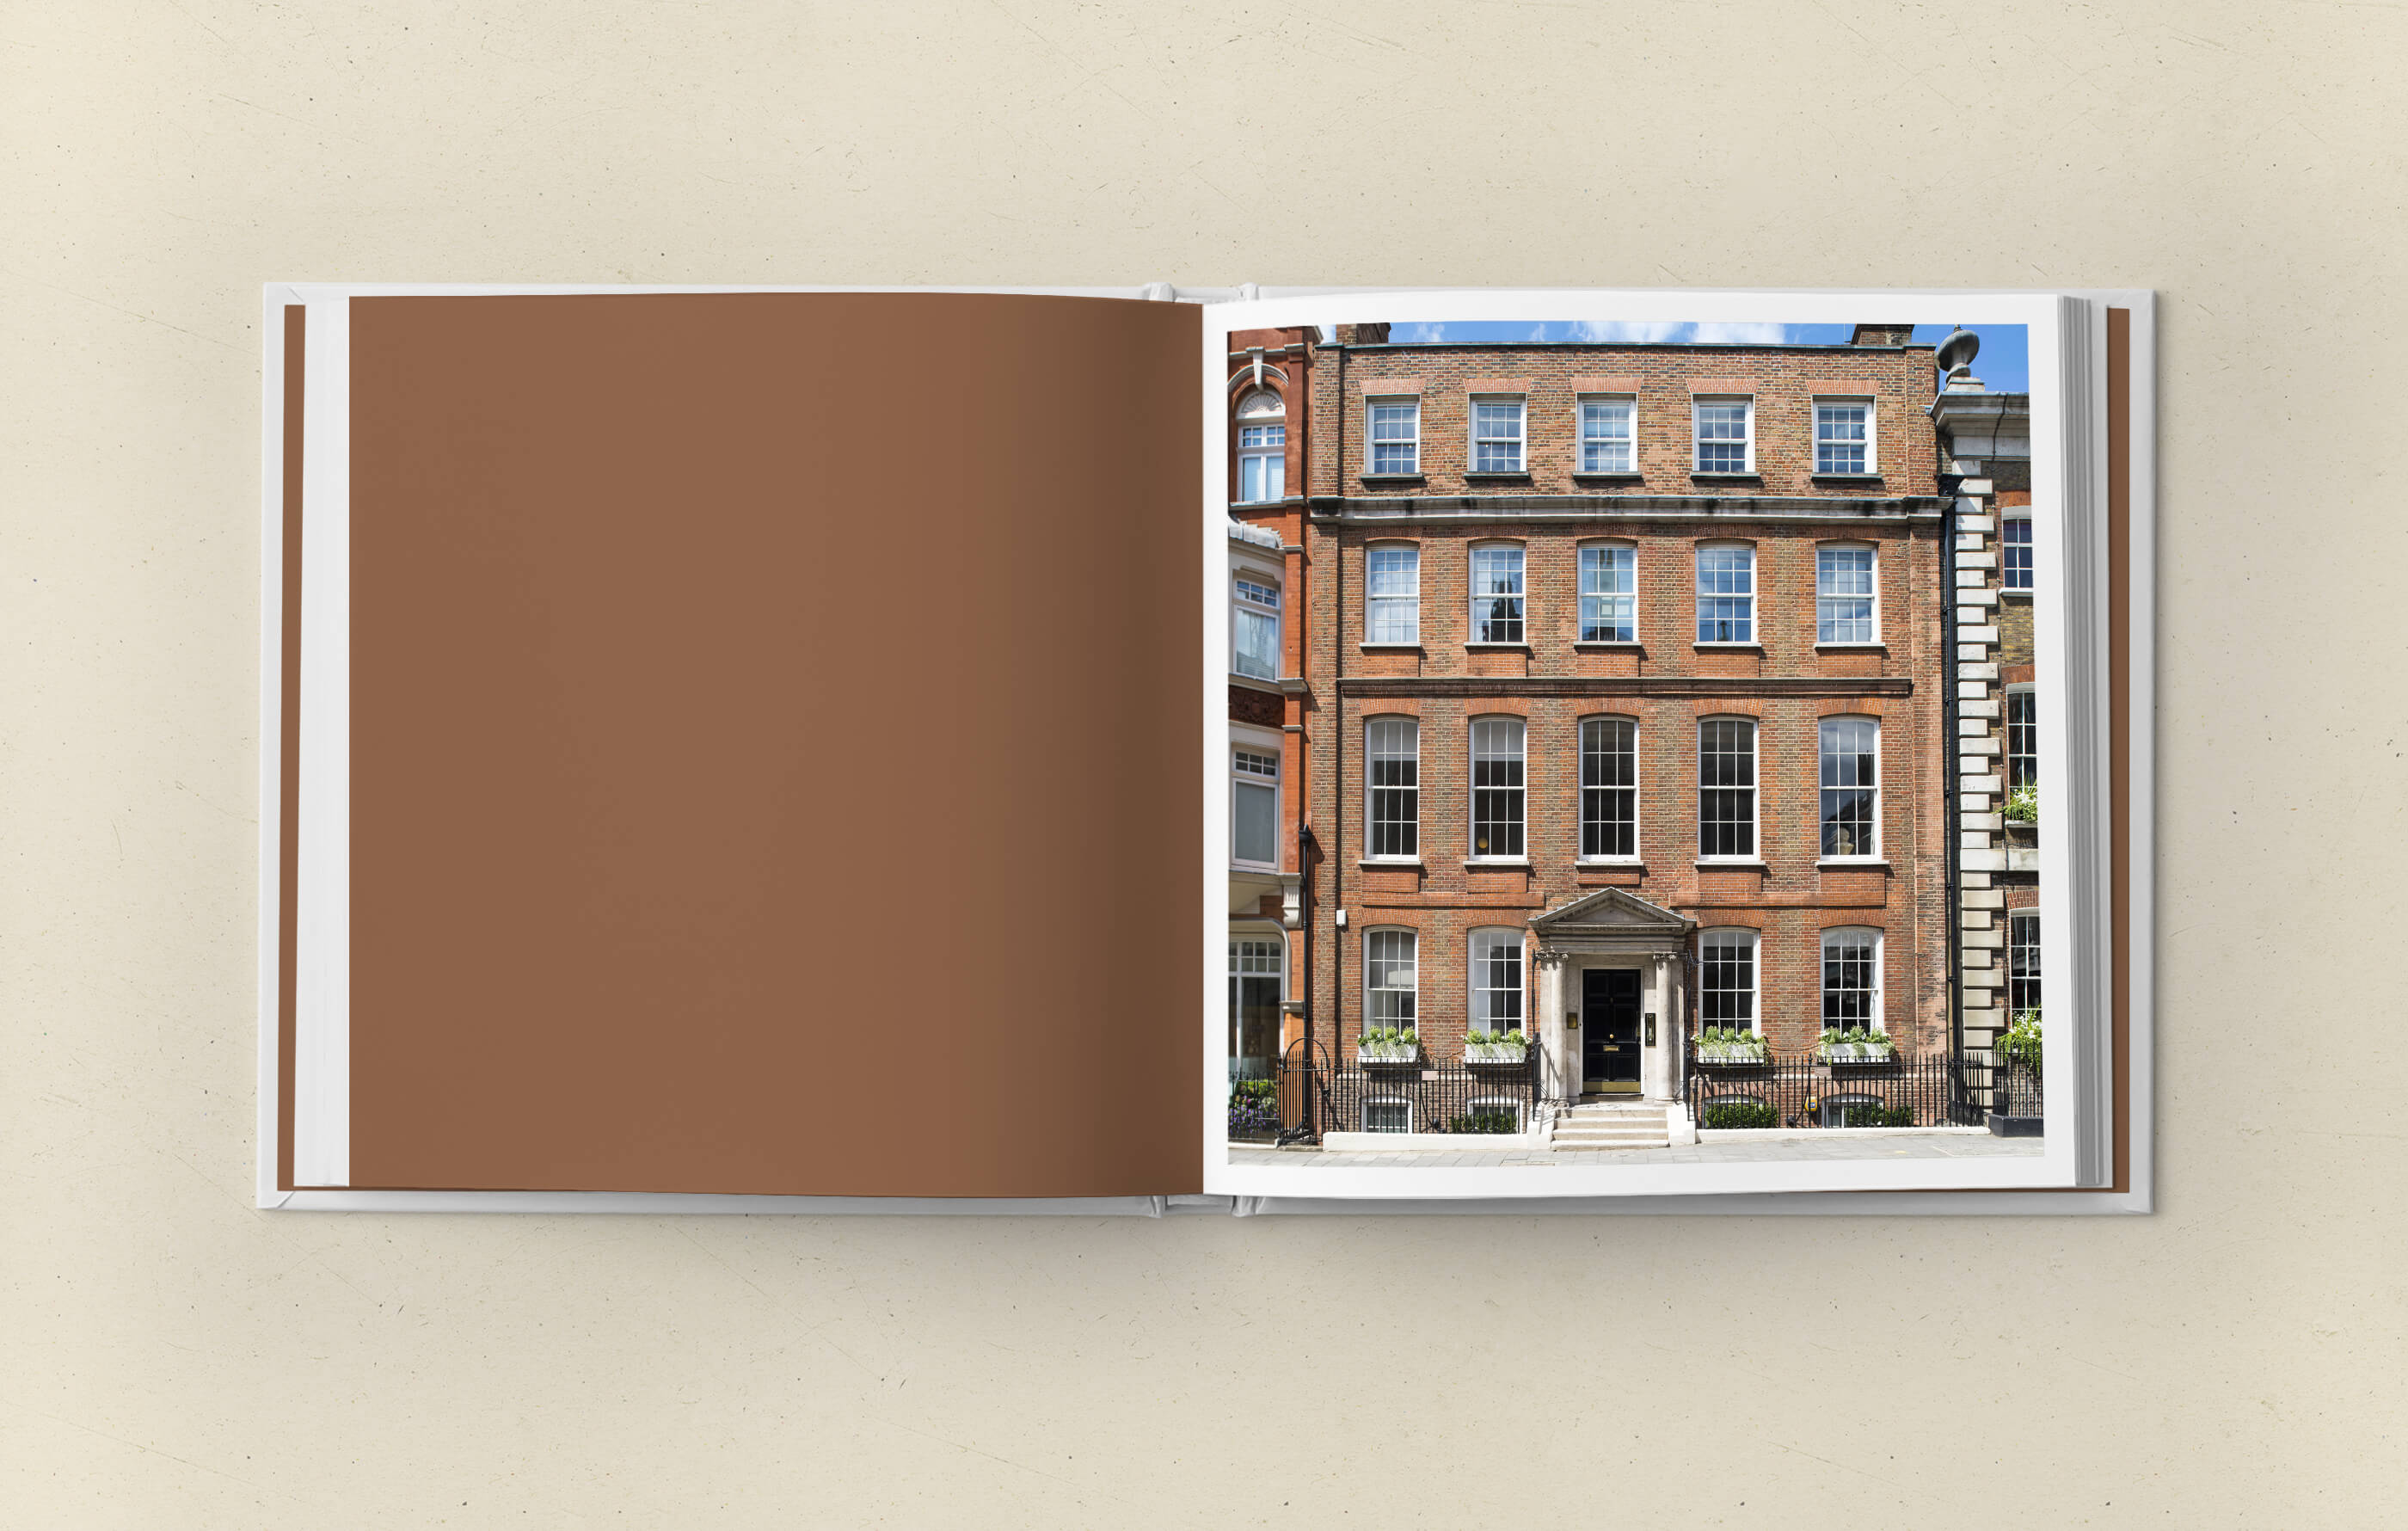 Open brochure spread on a beige background featuring a front view photograph of 9 Clifford Street, with its 4 floors and basement level